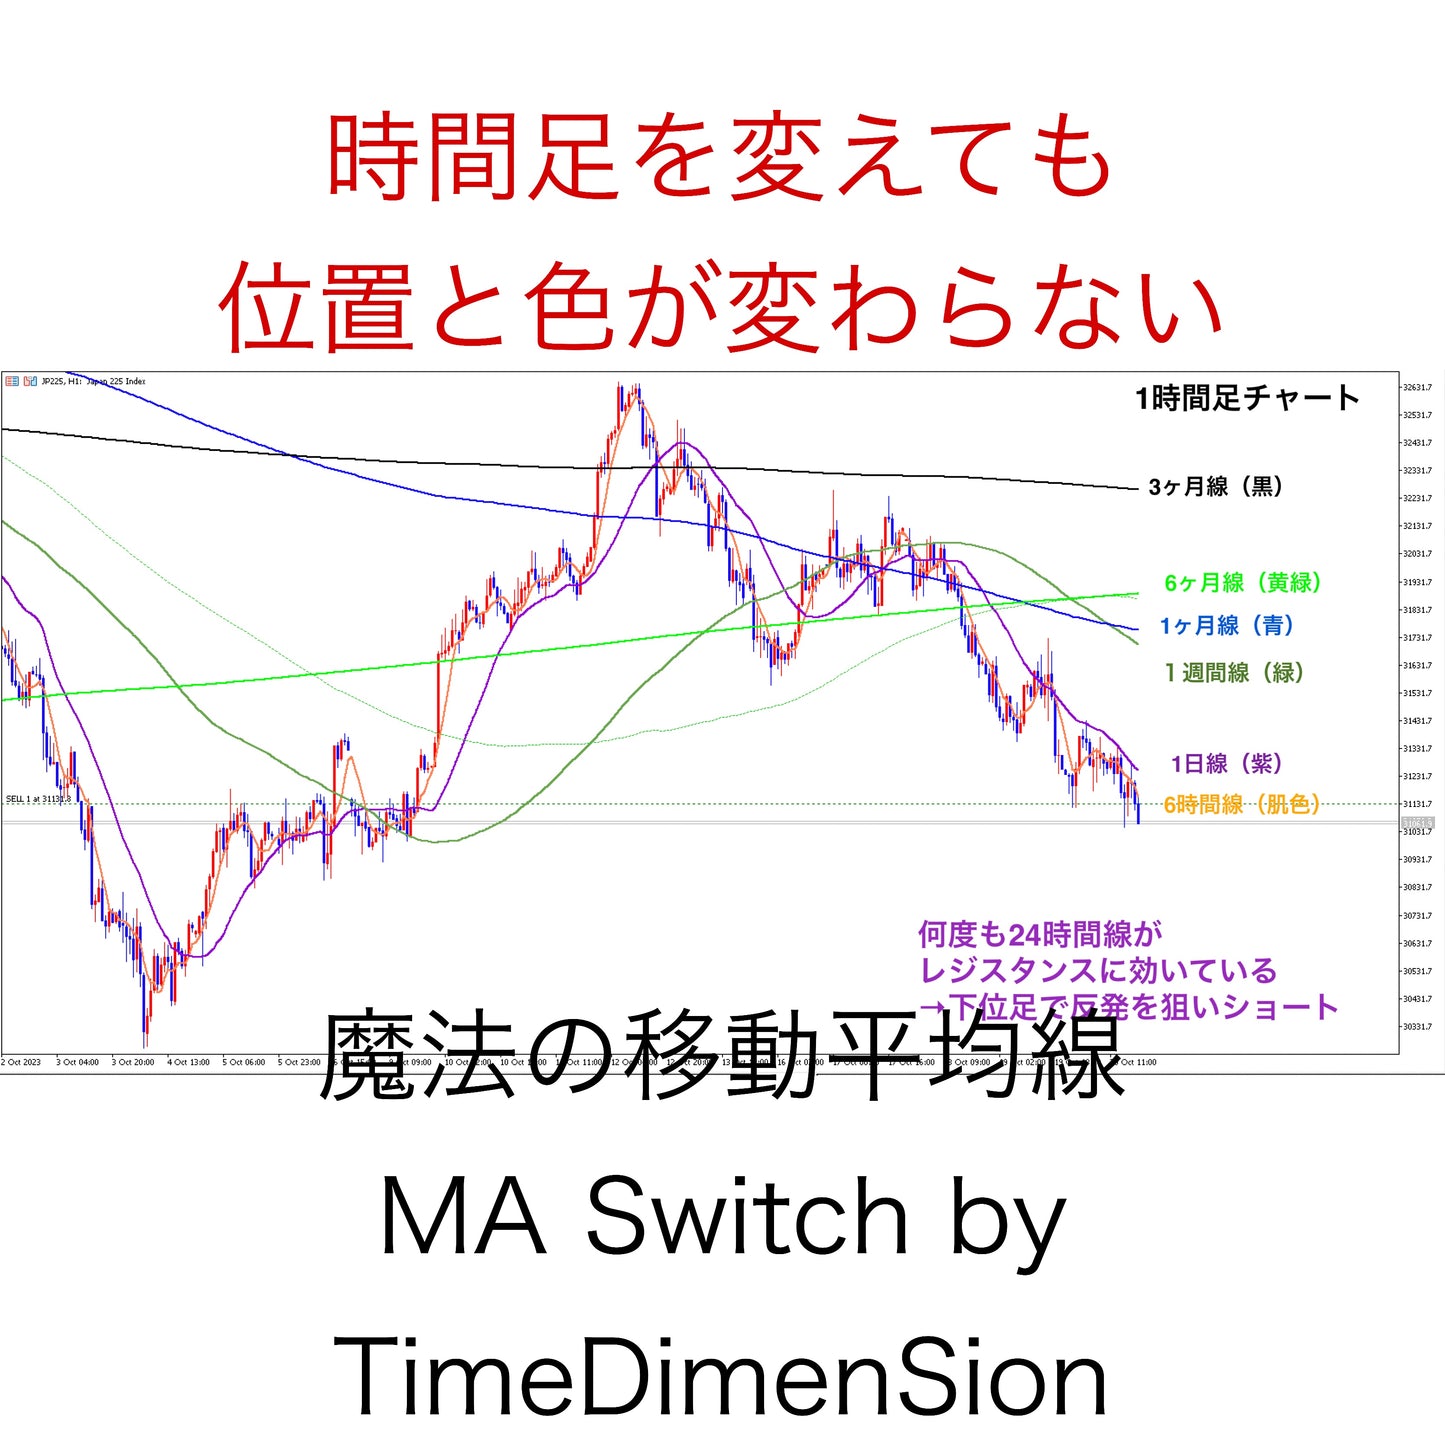 ②MA Switch by TimeDimenSion [standard] (free for a limited time)